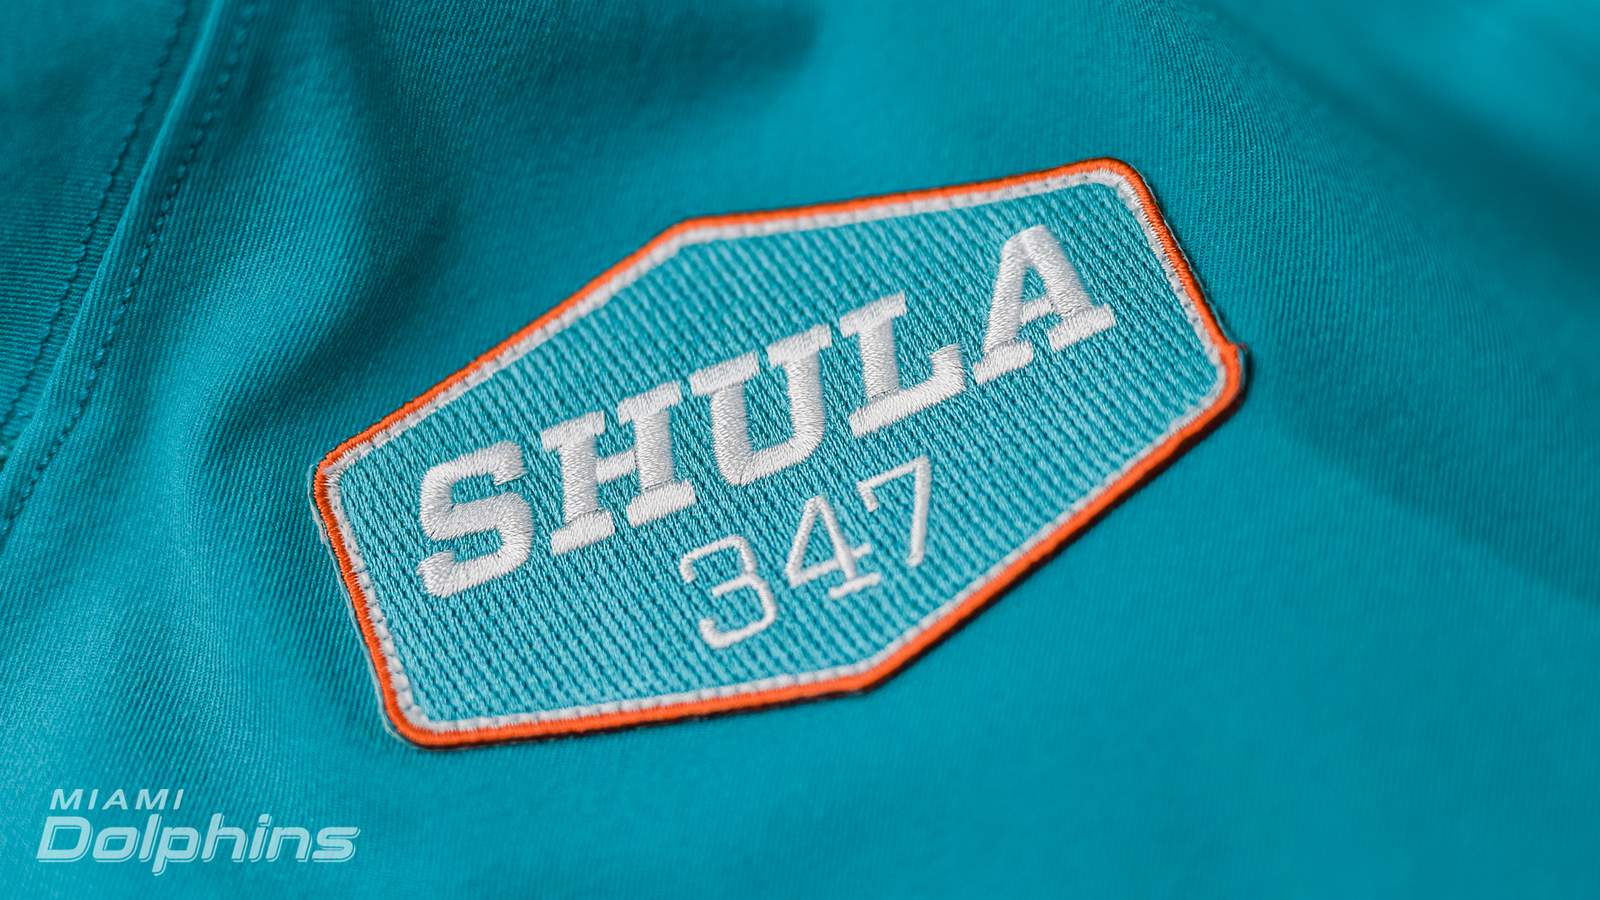 Check out the Don Shula patch that will be on the Dolphins uniforms